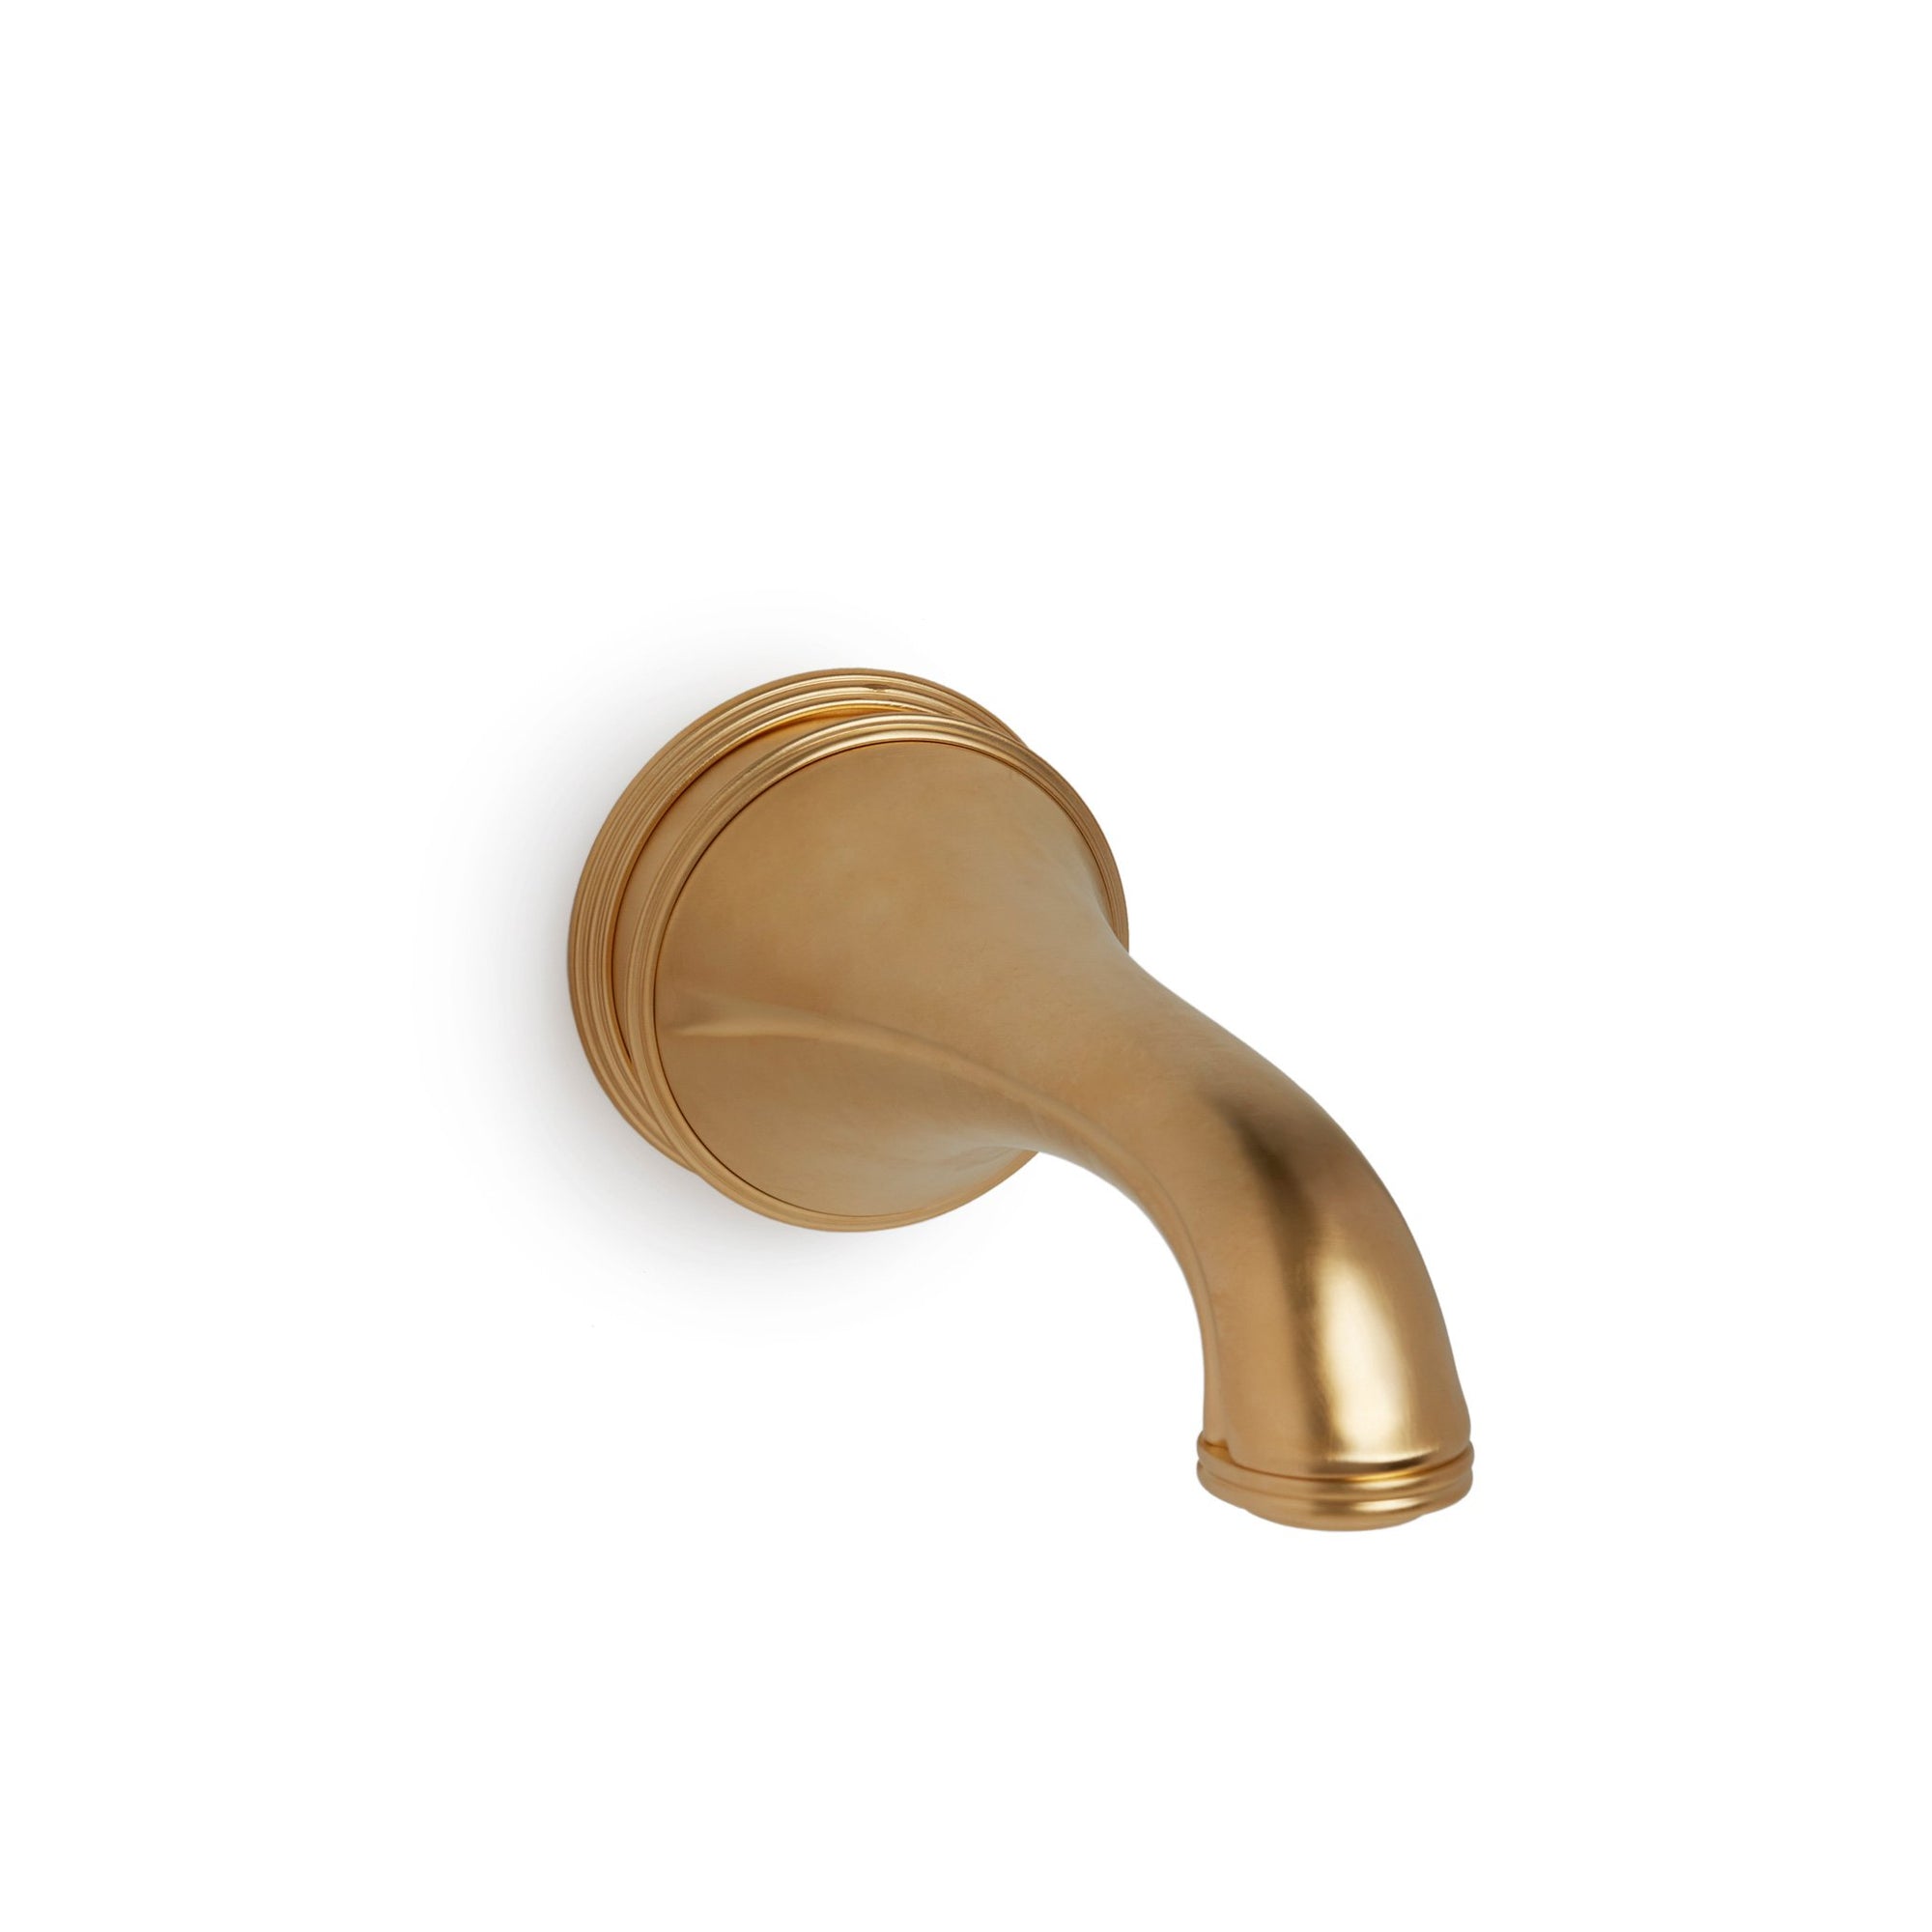 0825TUB-GP Sherle Wagner International Grey Wall Mount Tub Spout in Gold Plate metal finish